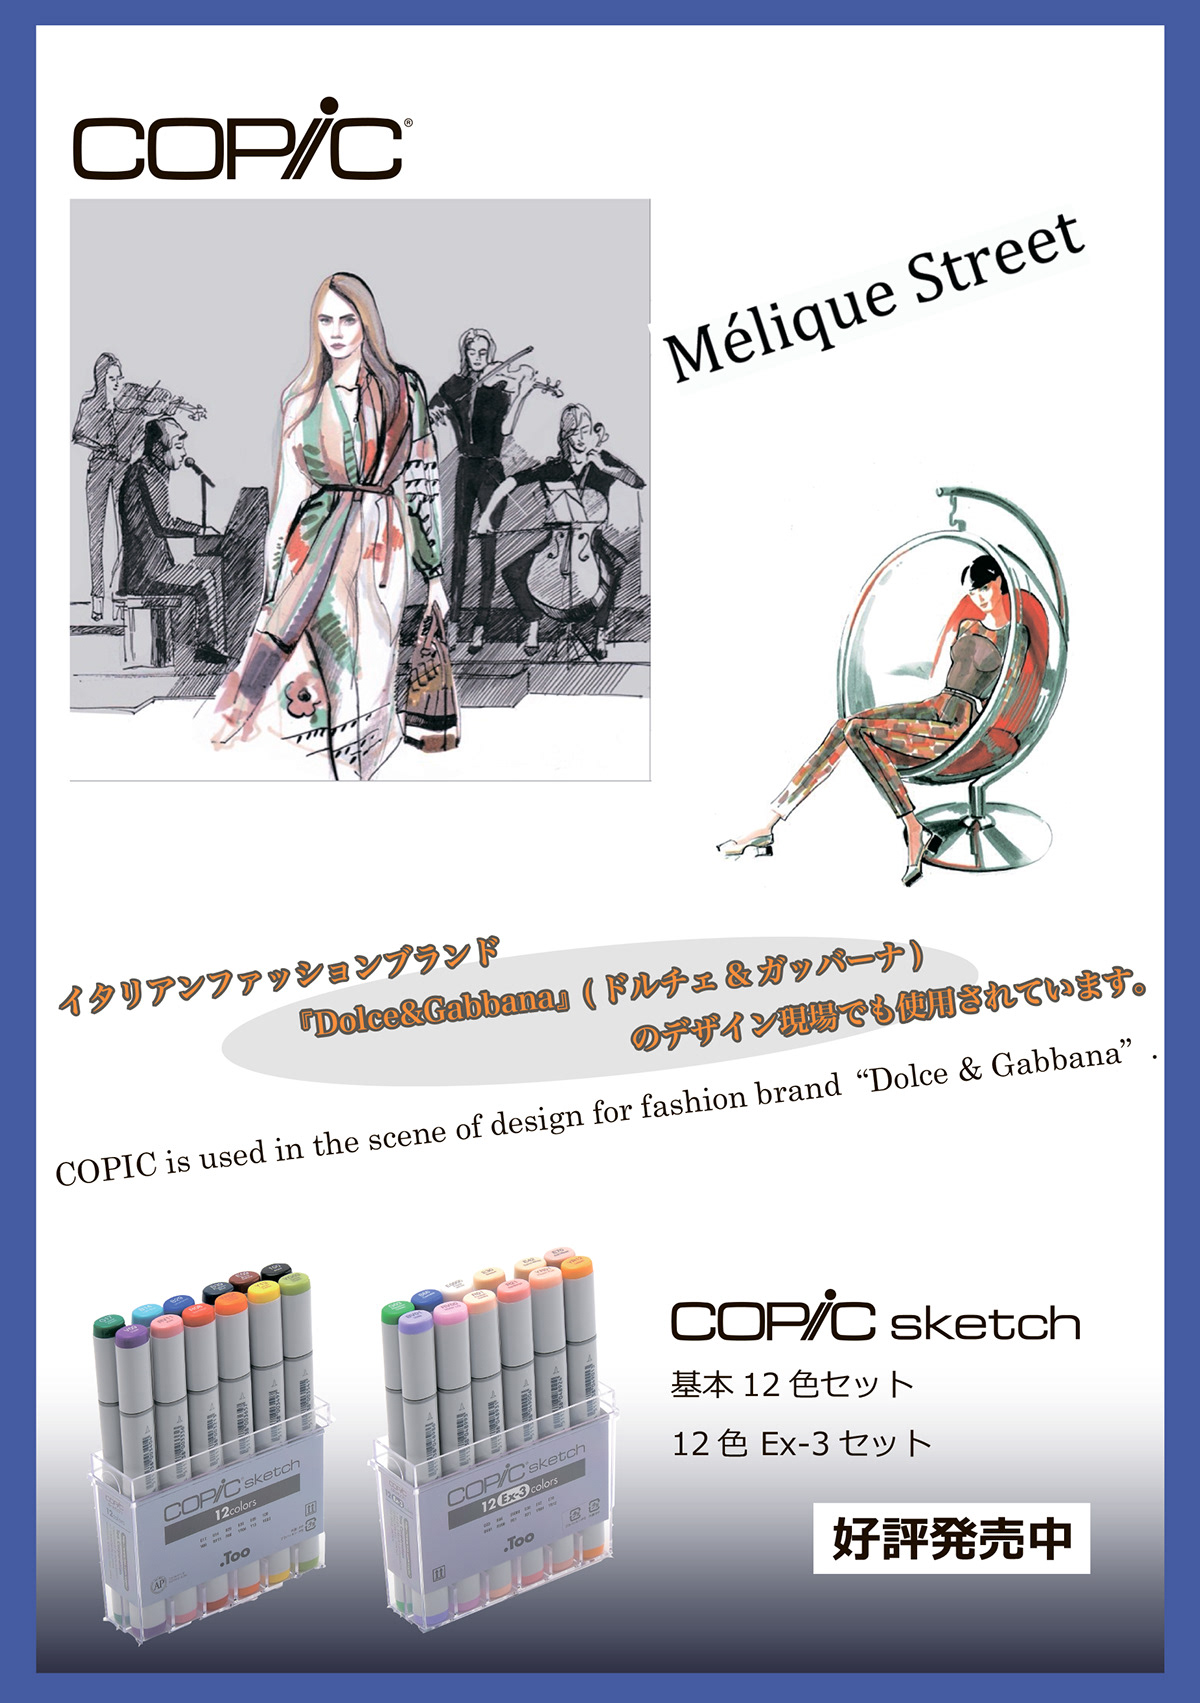 Copic copic markers tokyo japan Ginza street ginza fashion illustration